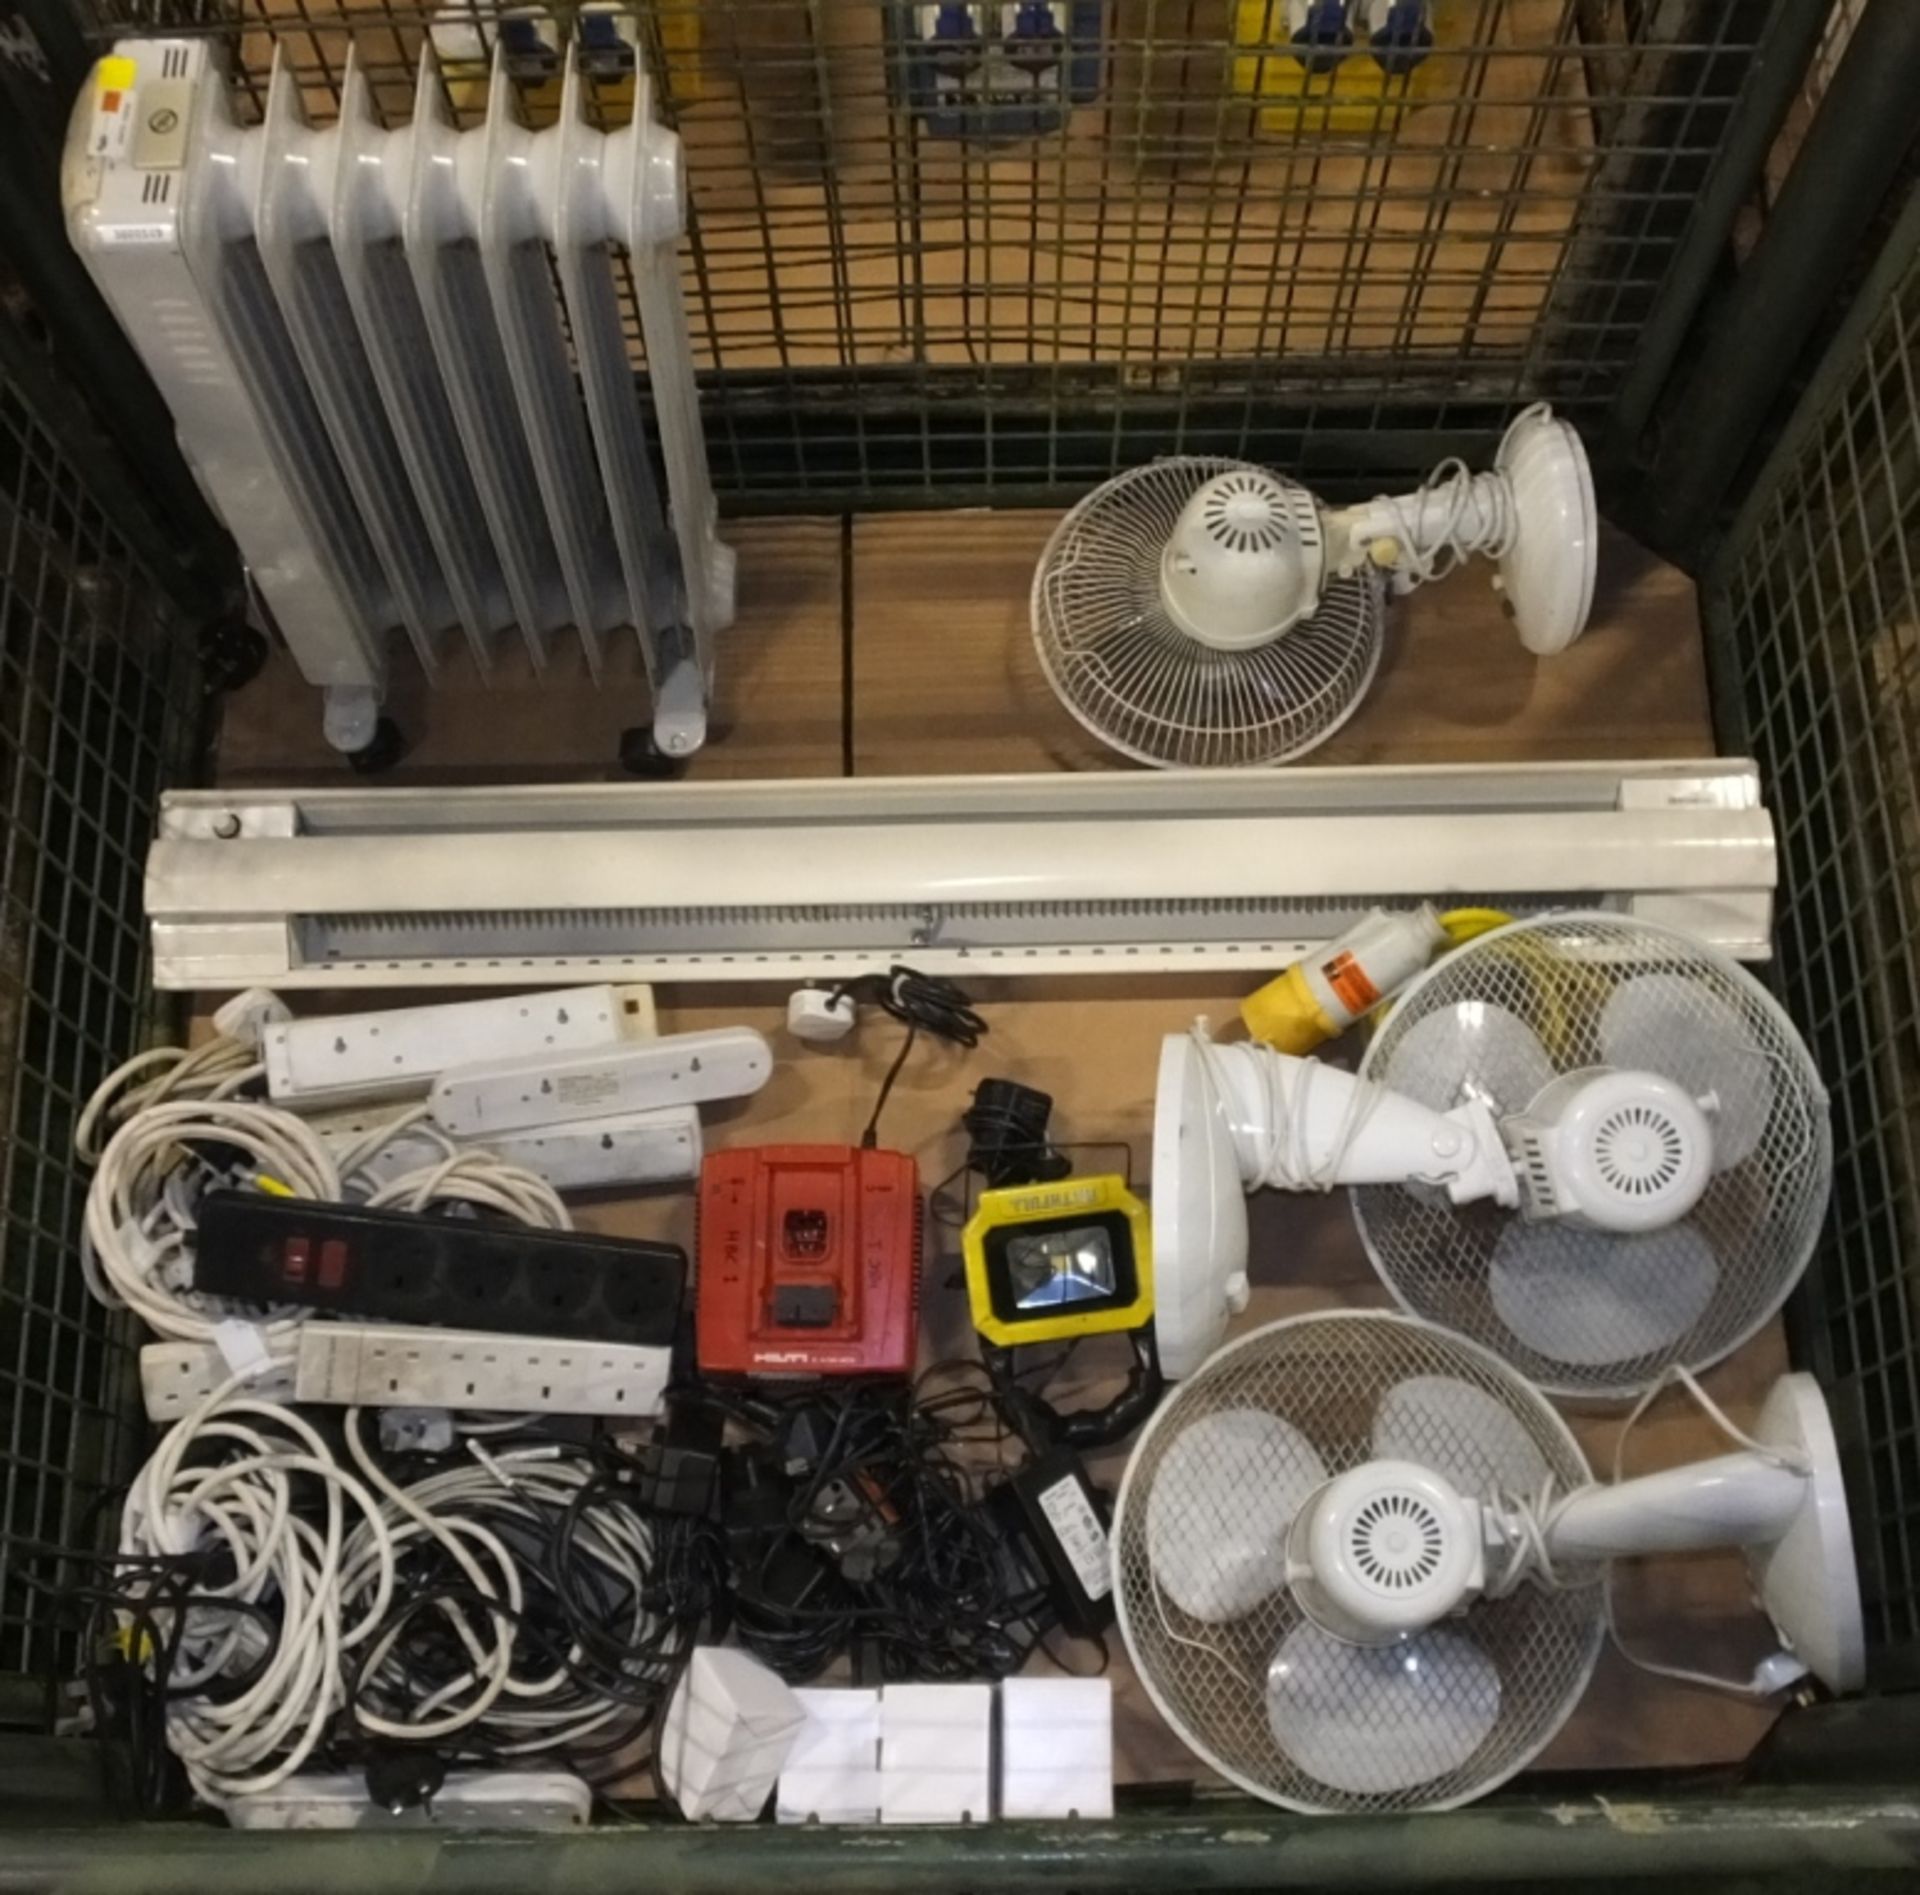 Domestic Electric Fans, Heater, Extension Leads